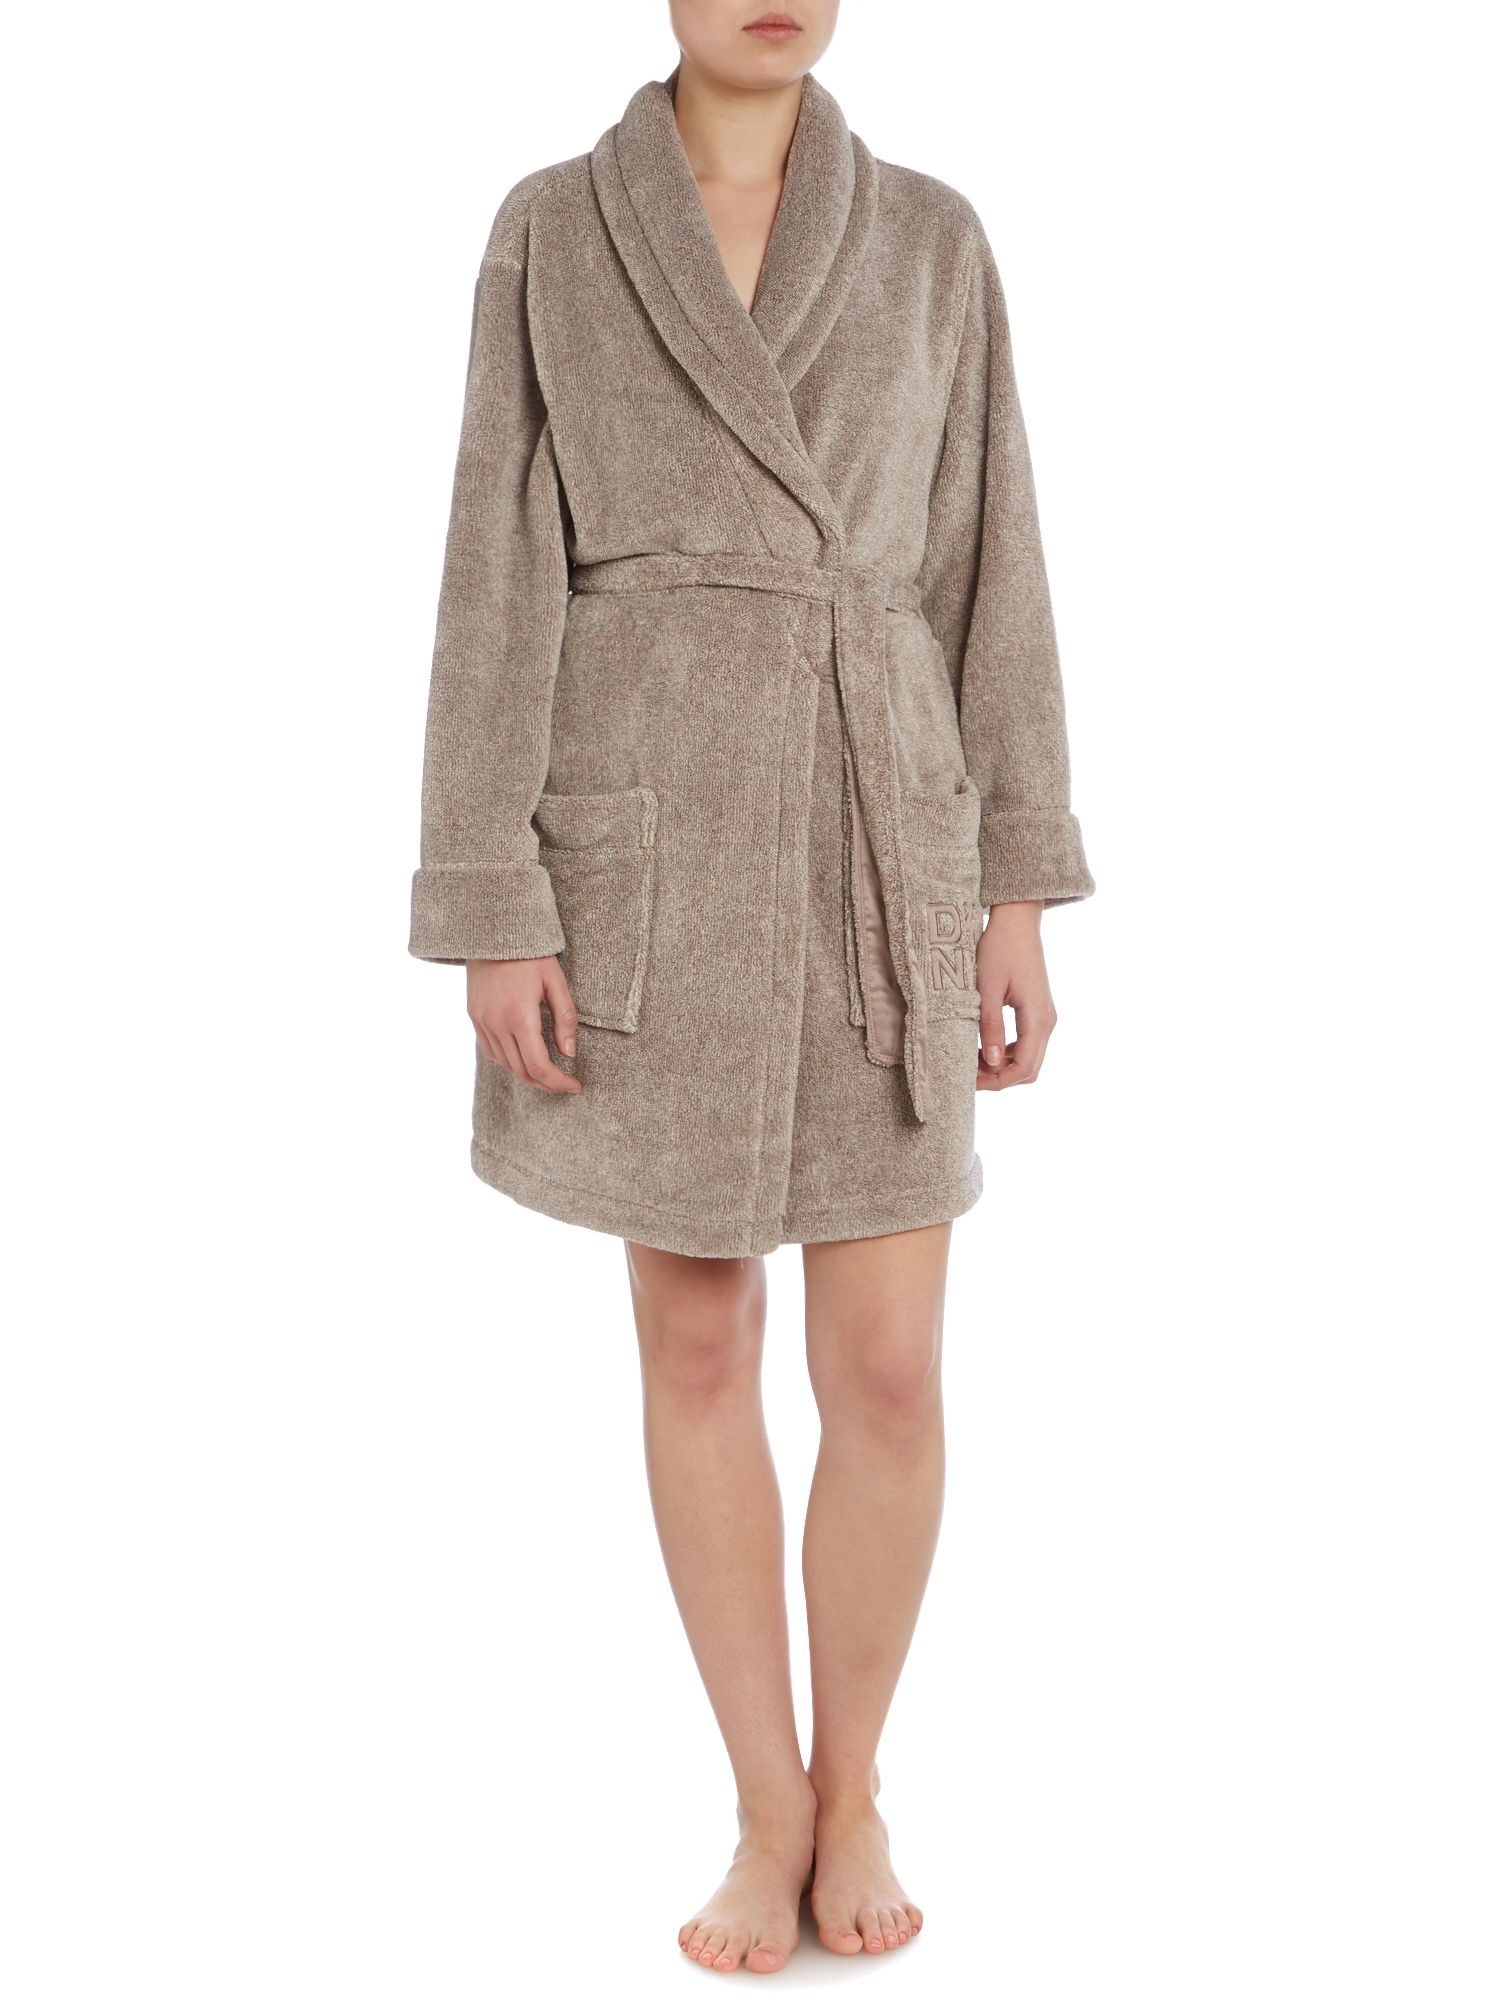 Dkny Signature Logo Robe in Gray (Charcoal) | Lyst